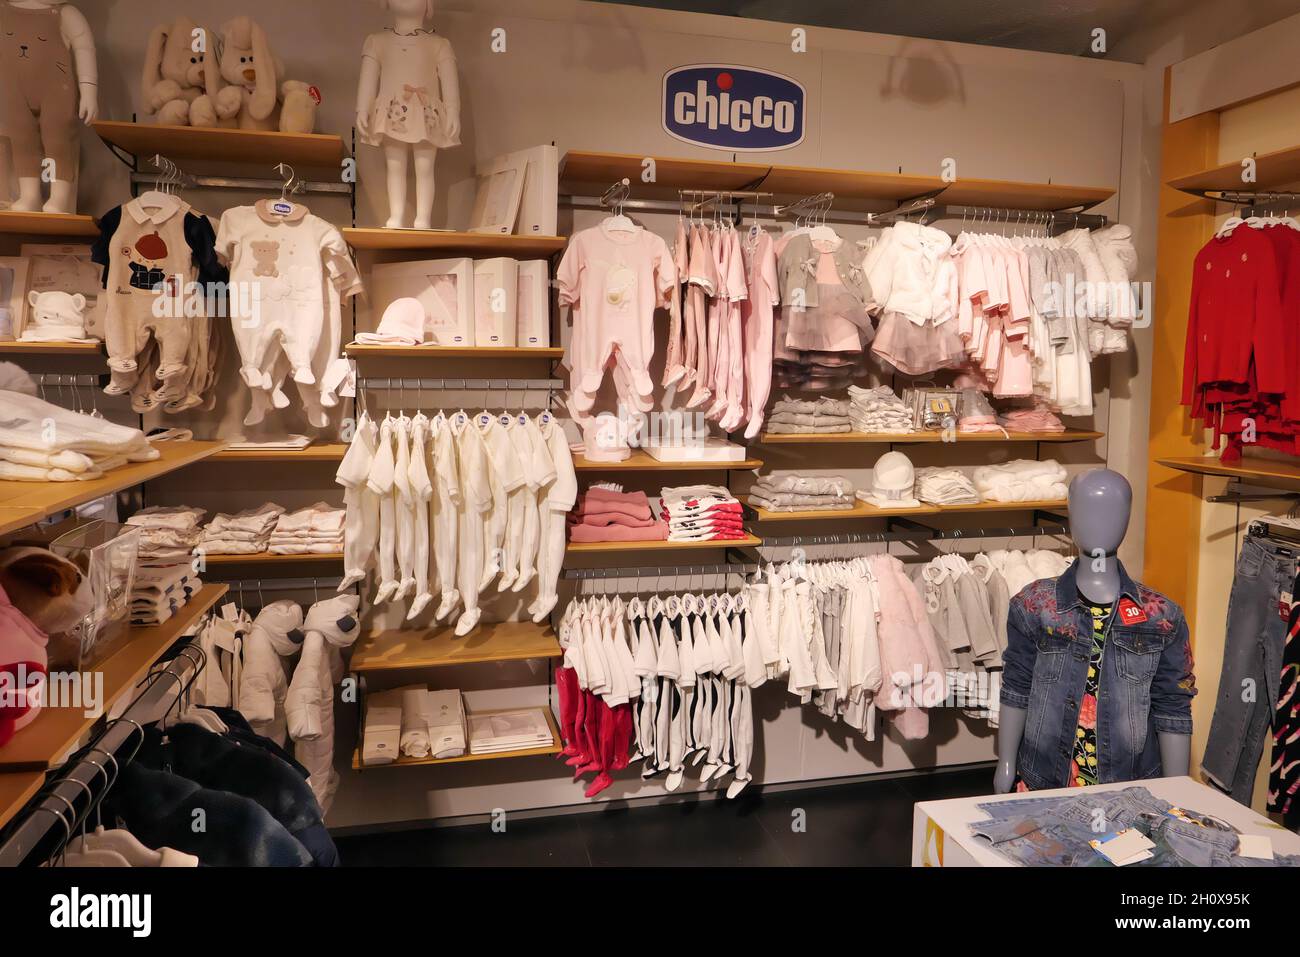 CHICCO CHILDREN'S CLOTHING ON DISPLAY INSIDE THE FASHION STORE Stock Photo